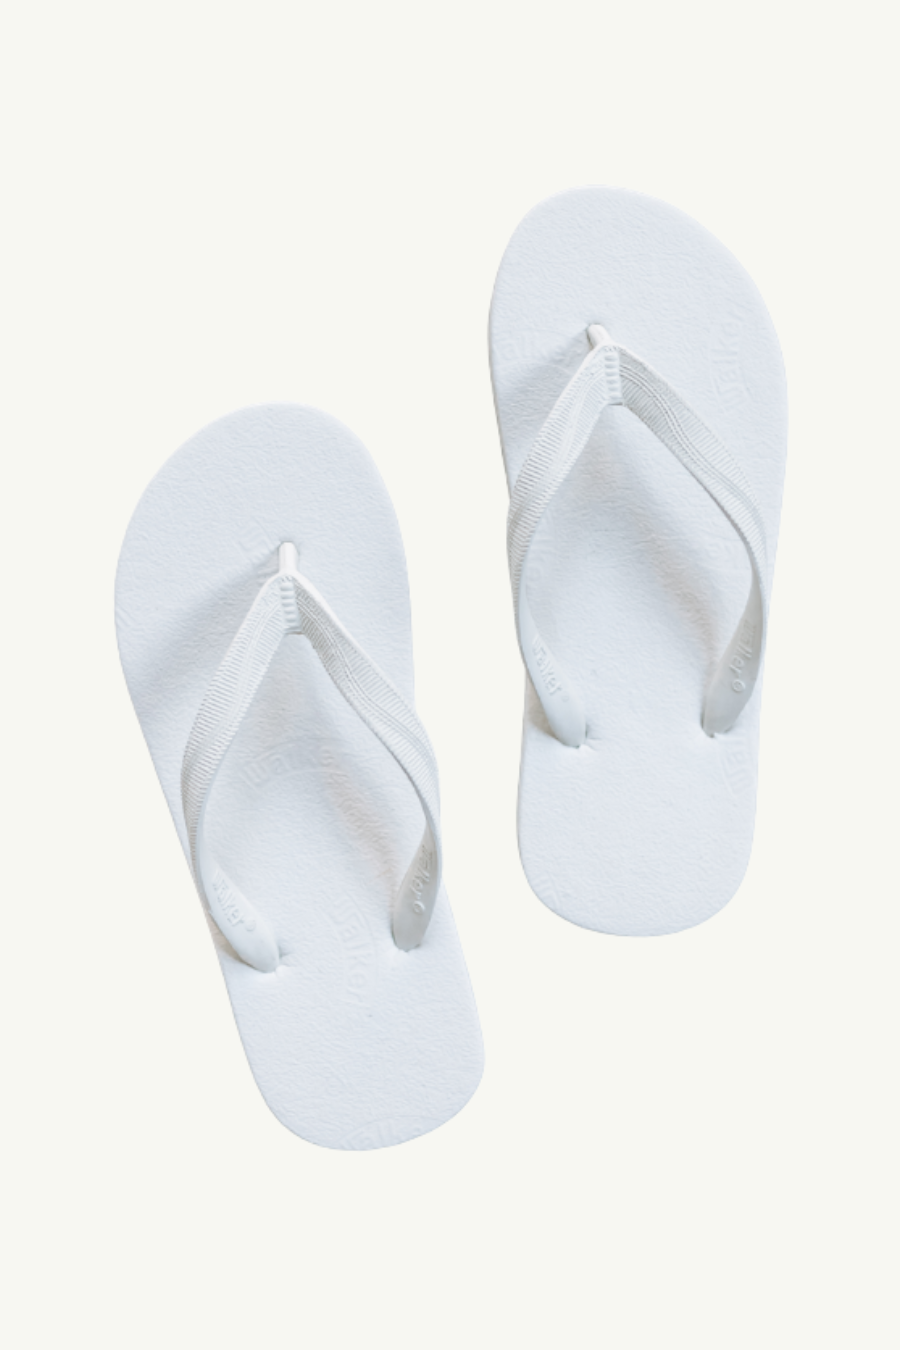 Our Rubber Slippers in White – Neat Nanny